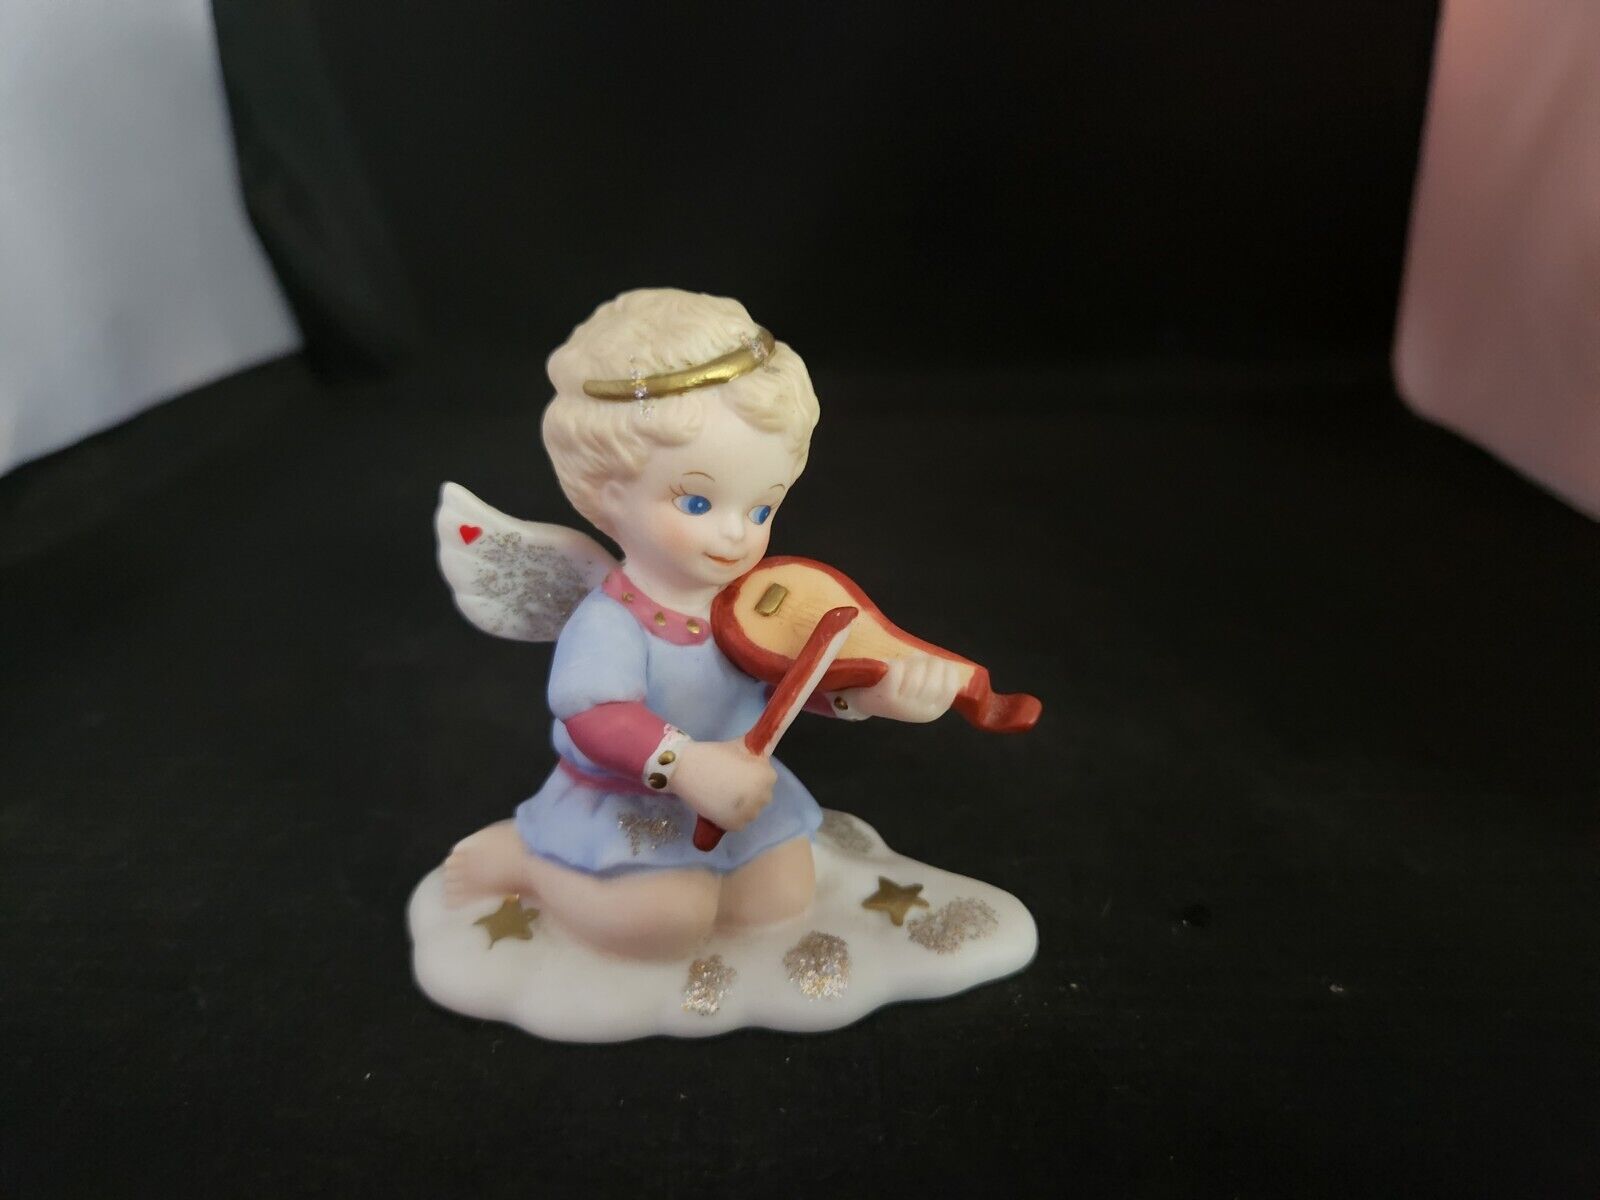 Bronson Collectibles Lyrical Lullaby From The Tender Hearts Collection Figurine